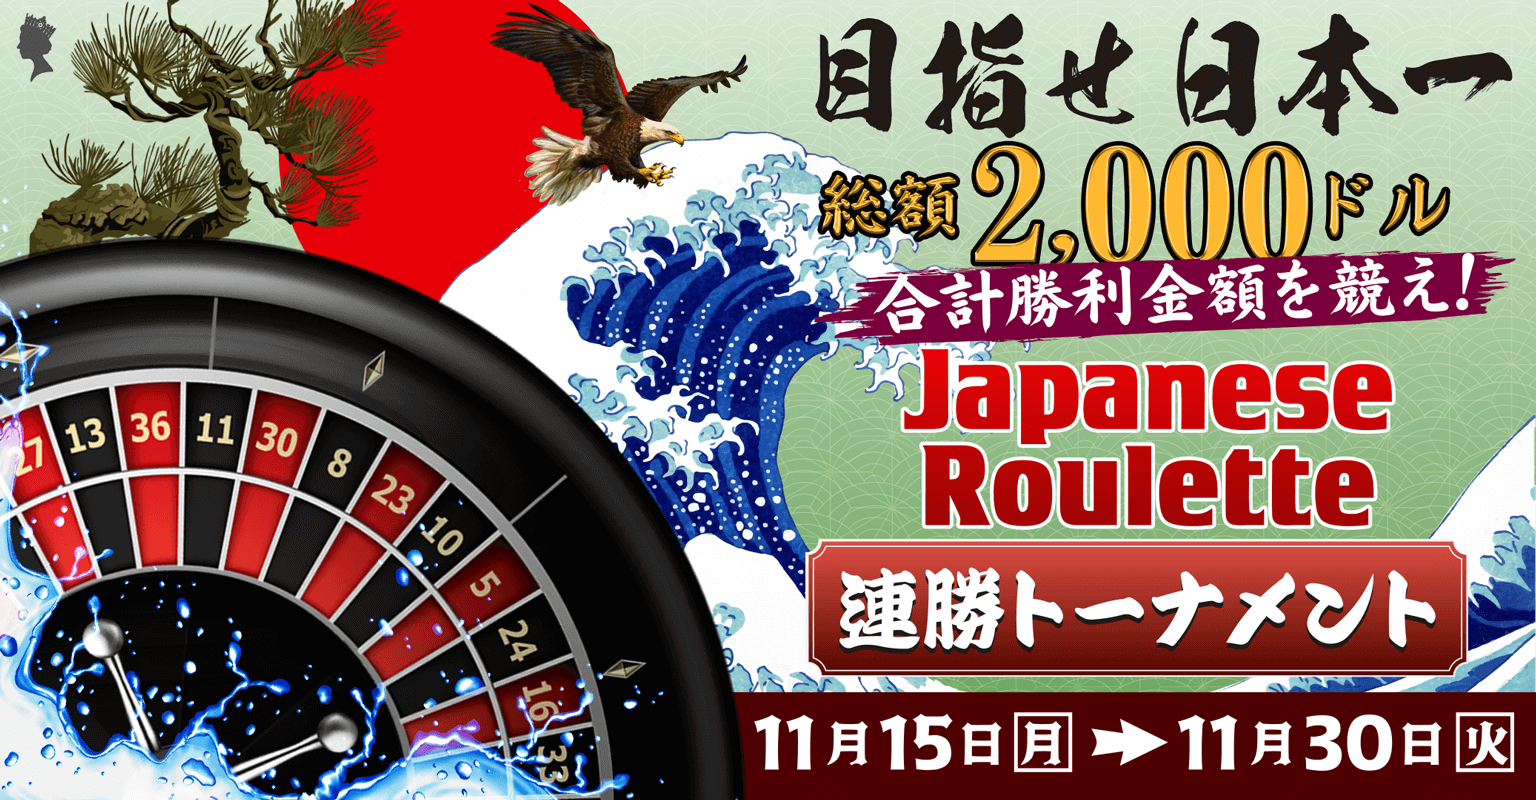 In this tournament, players will compete for the total winning amount of consecutive rounds of Japanese Roulette Check out more information on this event